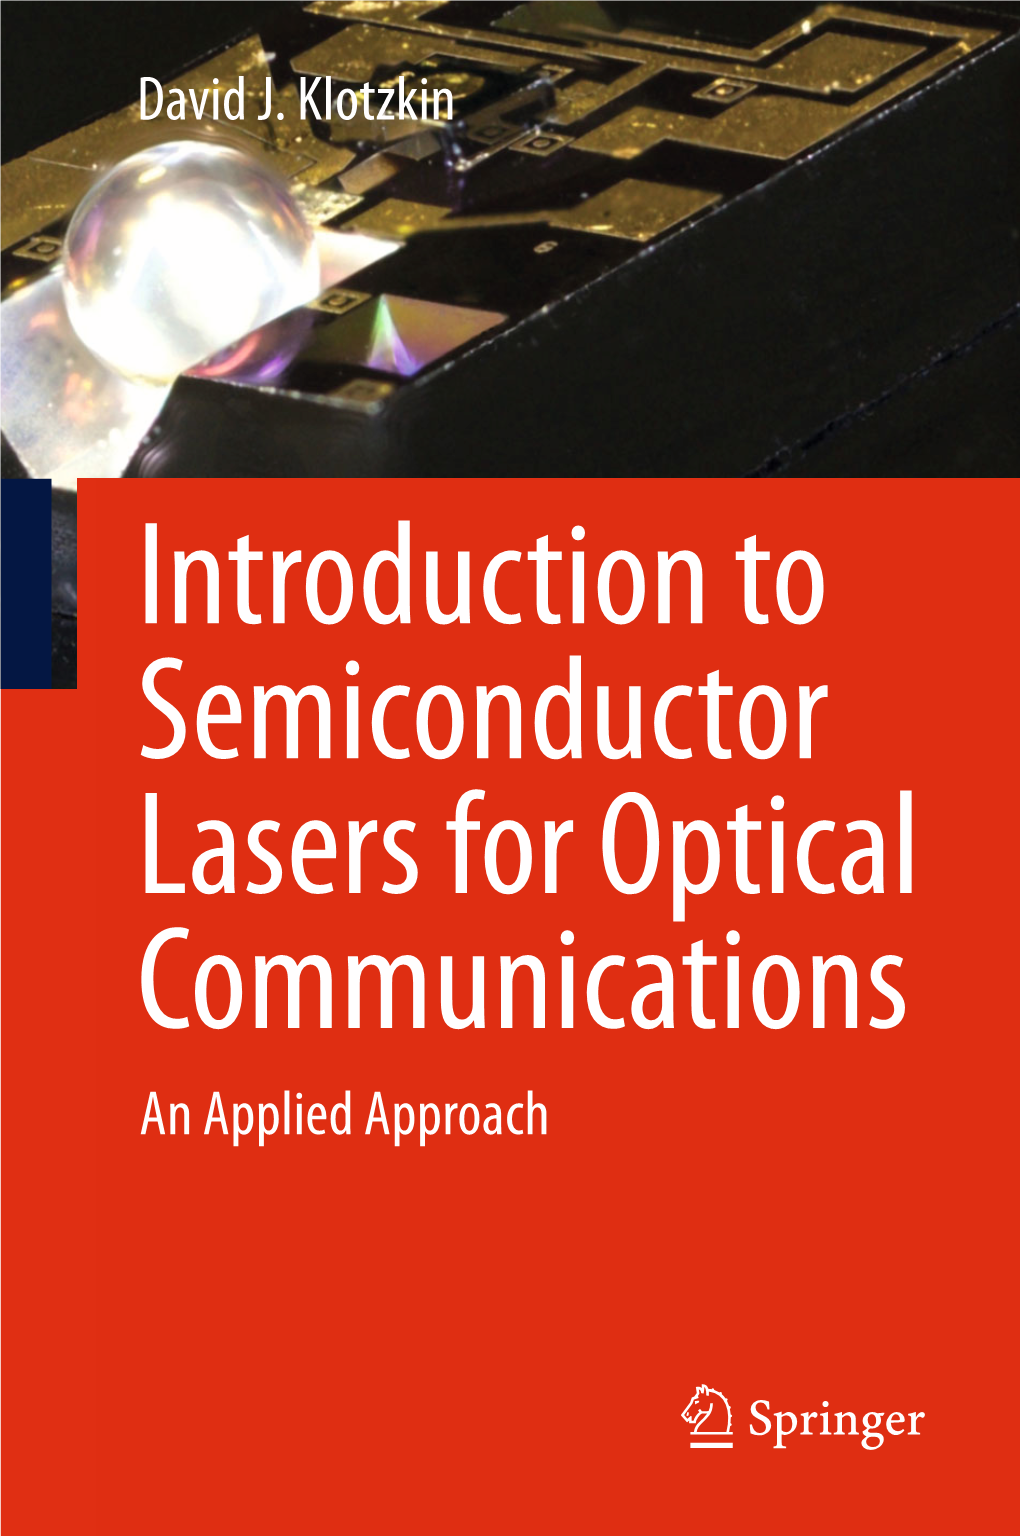 Introduction to Semiconductor Lasers for Optical Communications an Applied Approach Introduction to Semiconductor Lasers for Optical Communications David J